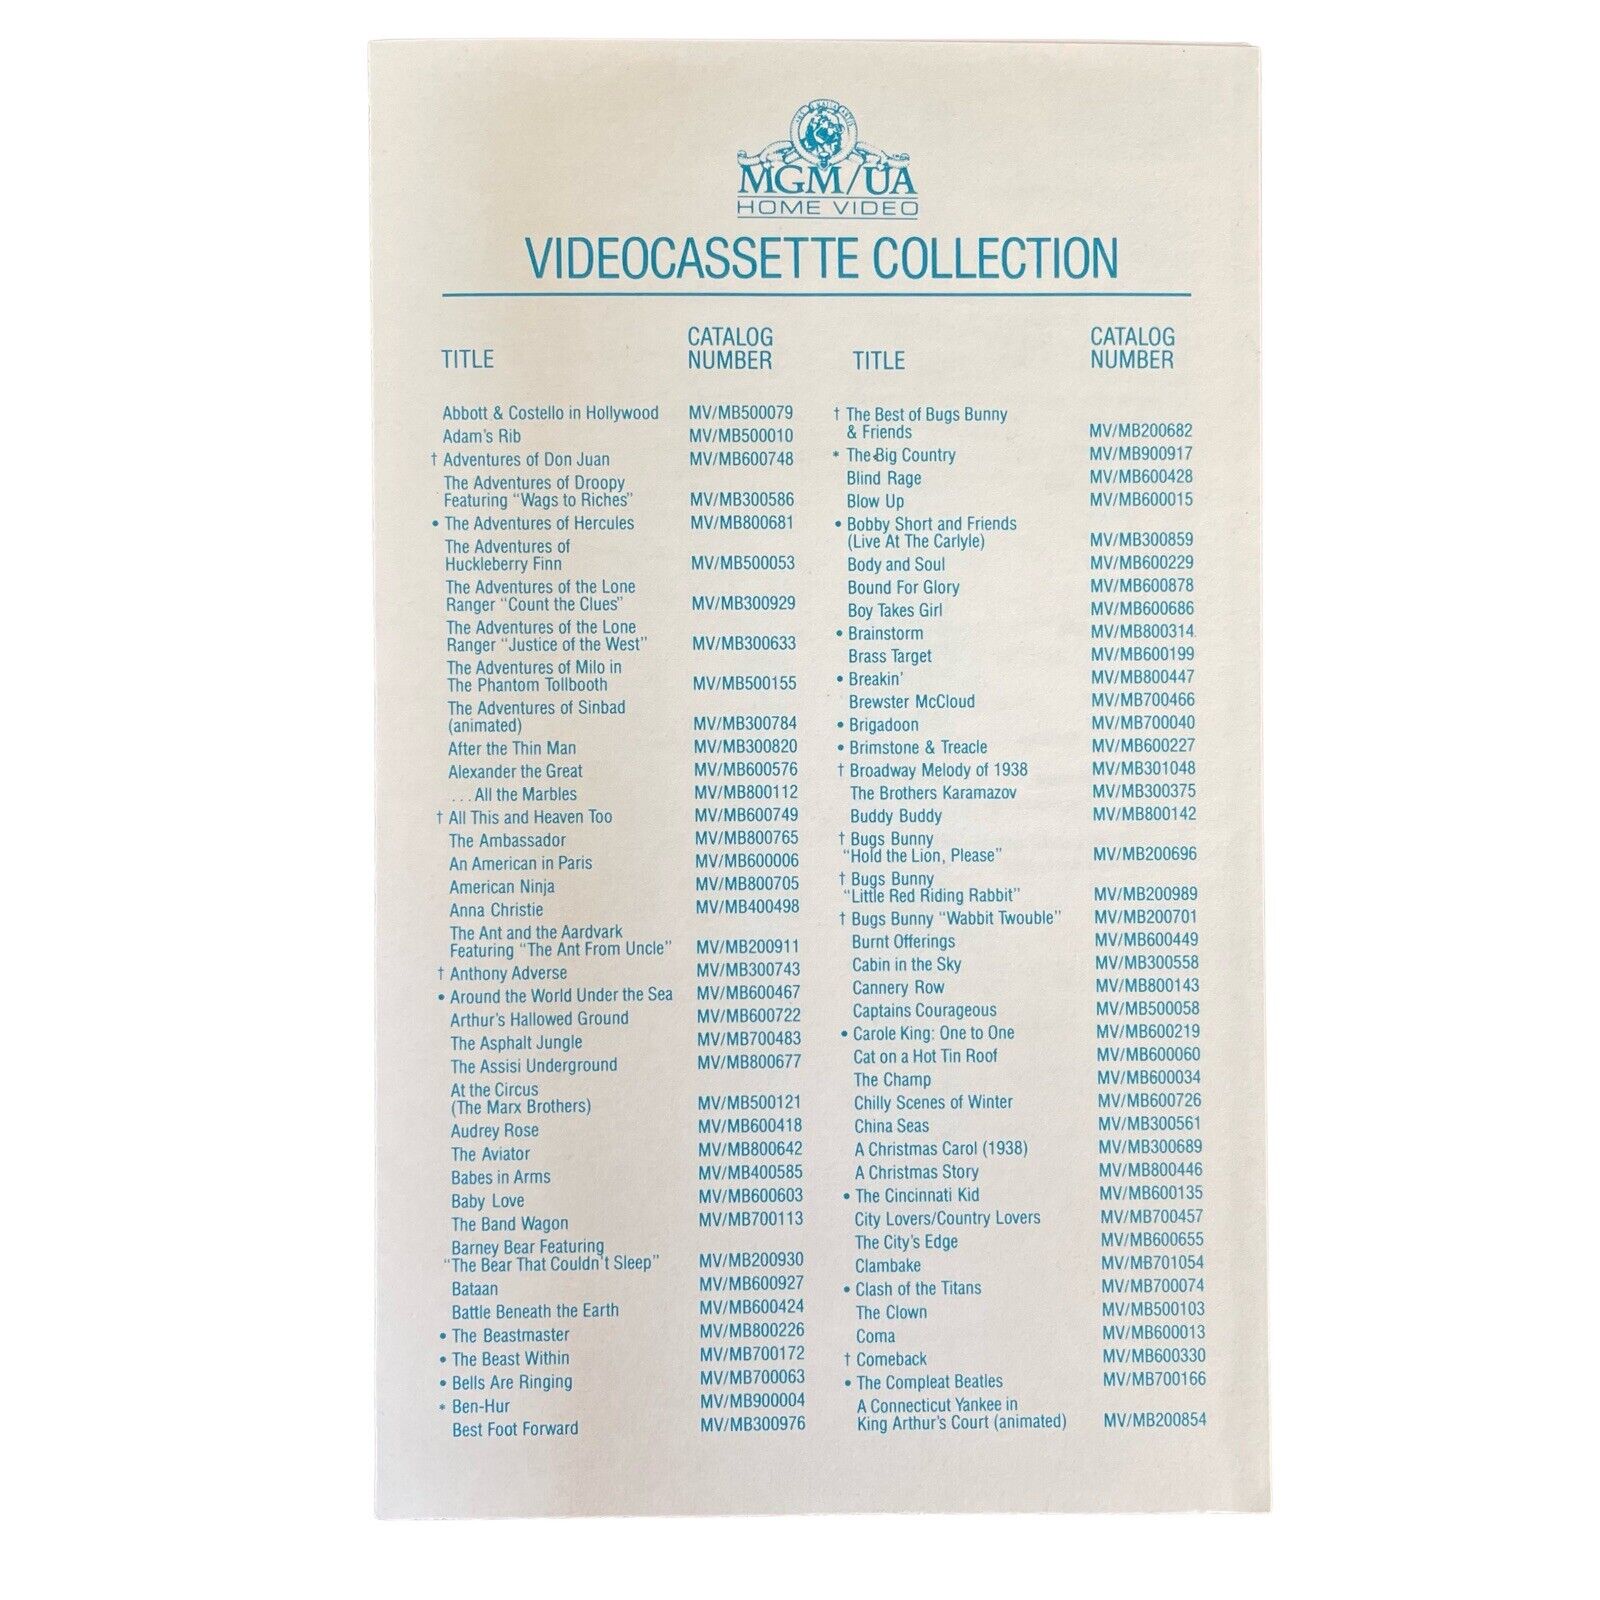 MGM / UA Videocassette Collection Brochure 4.25 x 7 inches